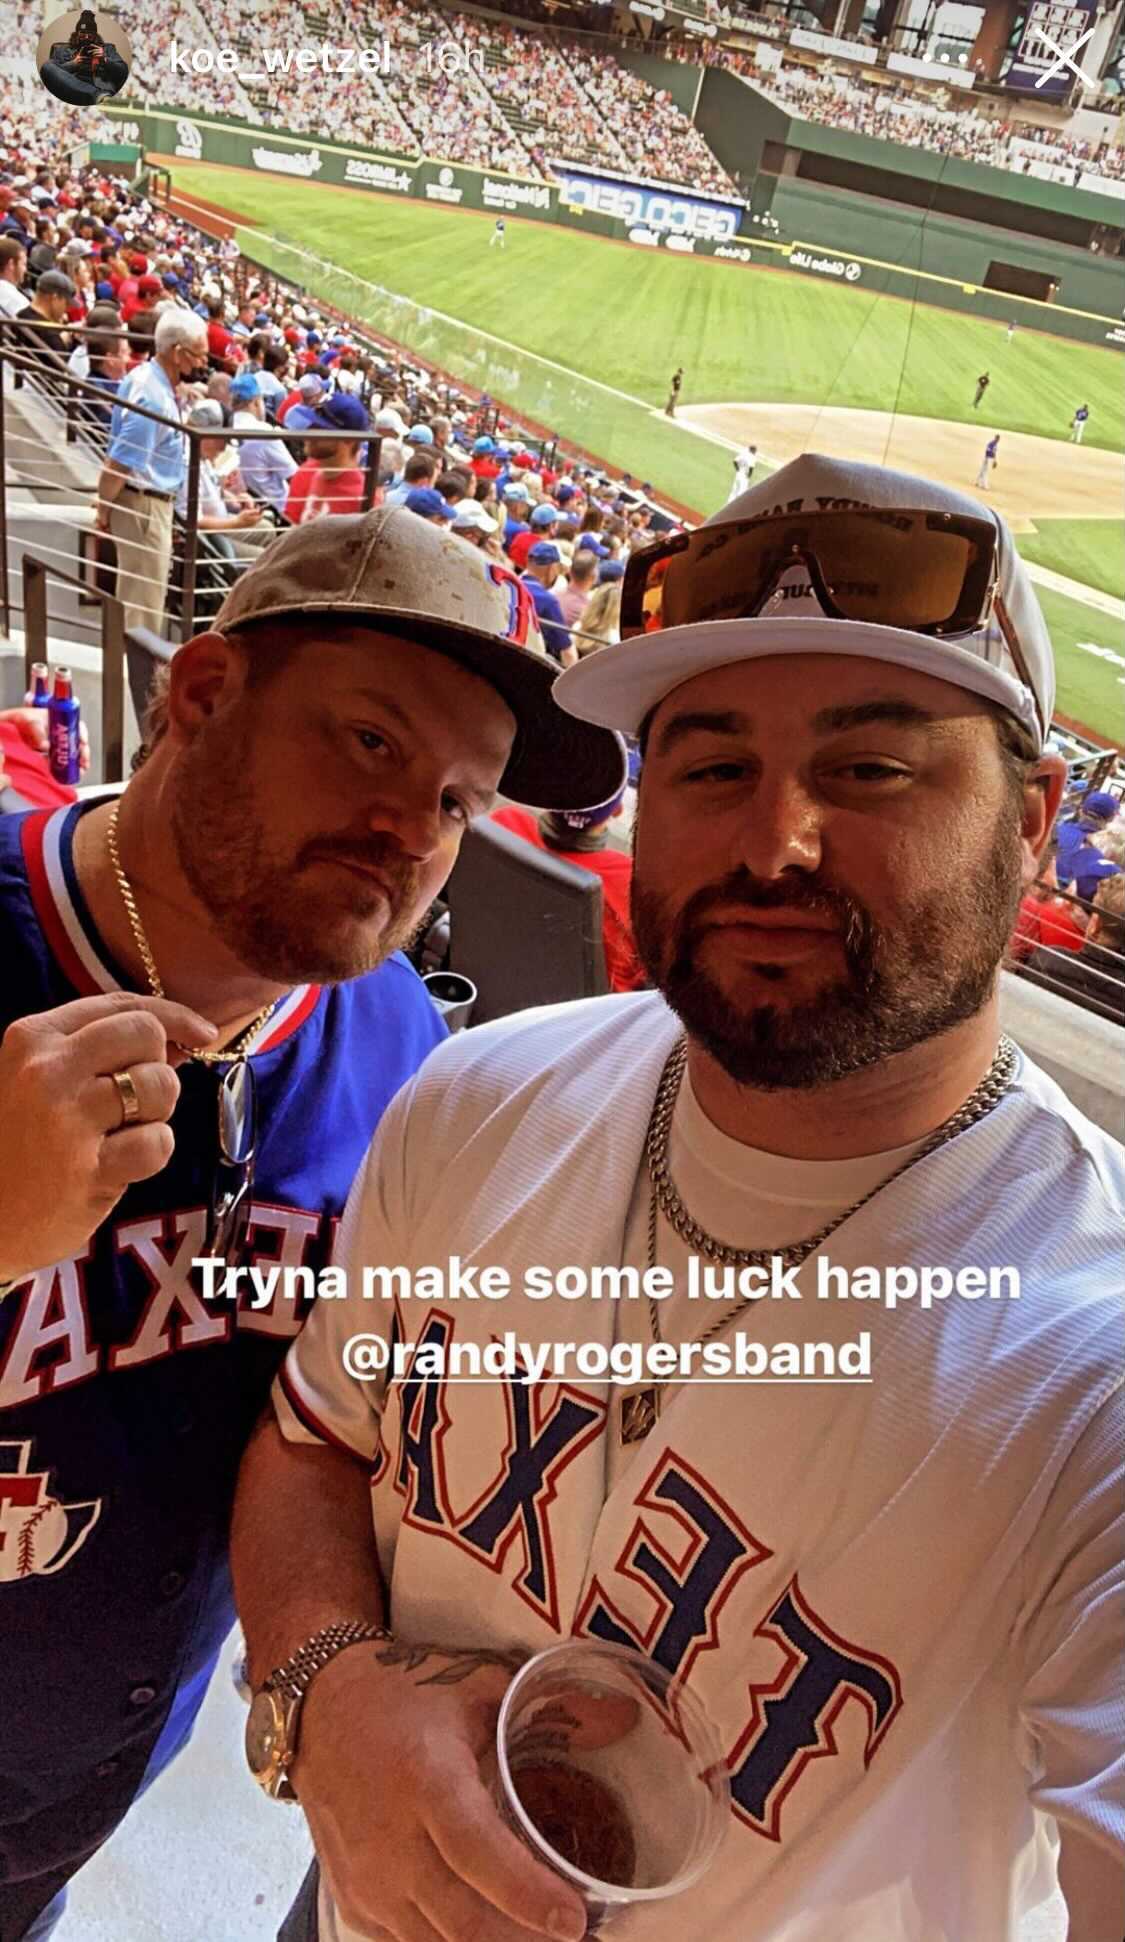 A couple of men posing for a picture at a baseball game